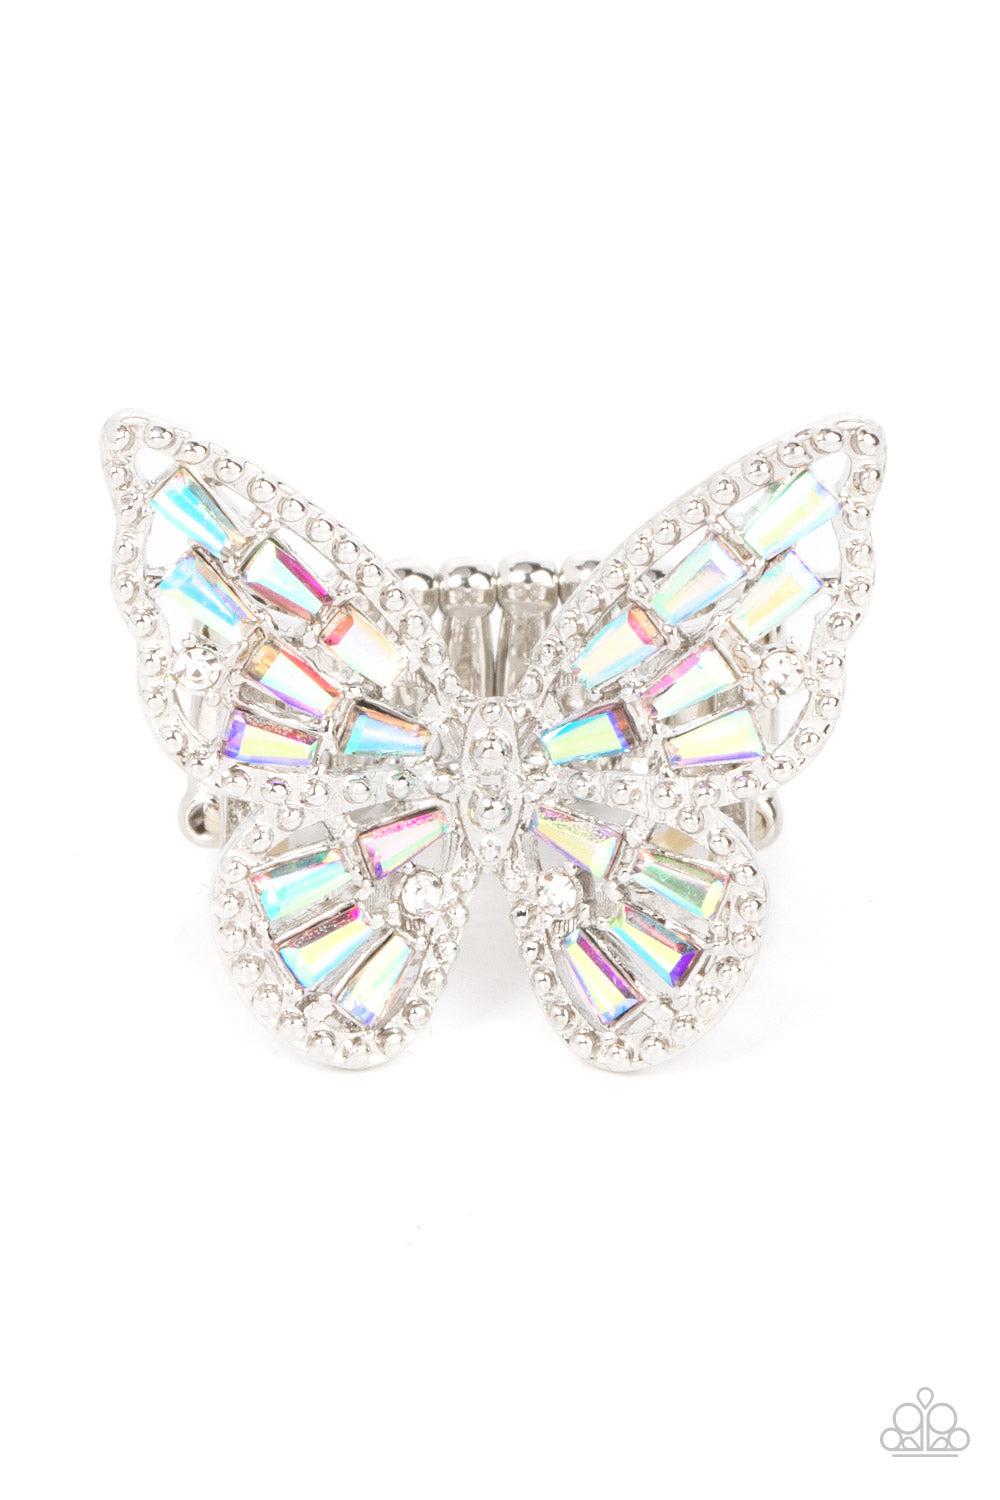 Bright-Eyed Butterfly Multi Iridescent Rhinestone Ring - Paparazzi Accessories- lightbox - CarasShop.com - $5 Jewelry by Cara Jewels